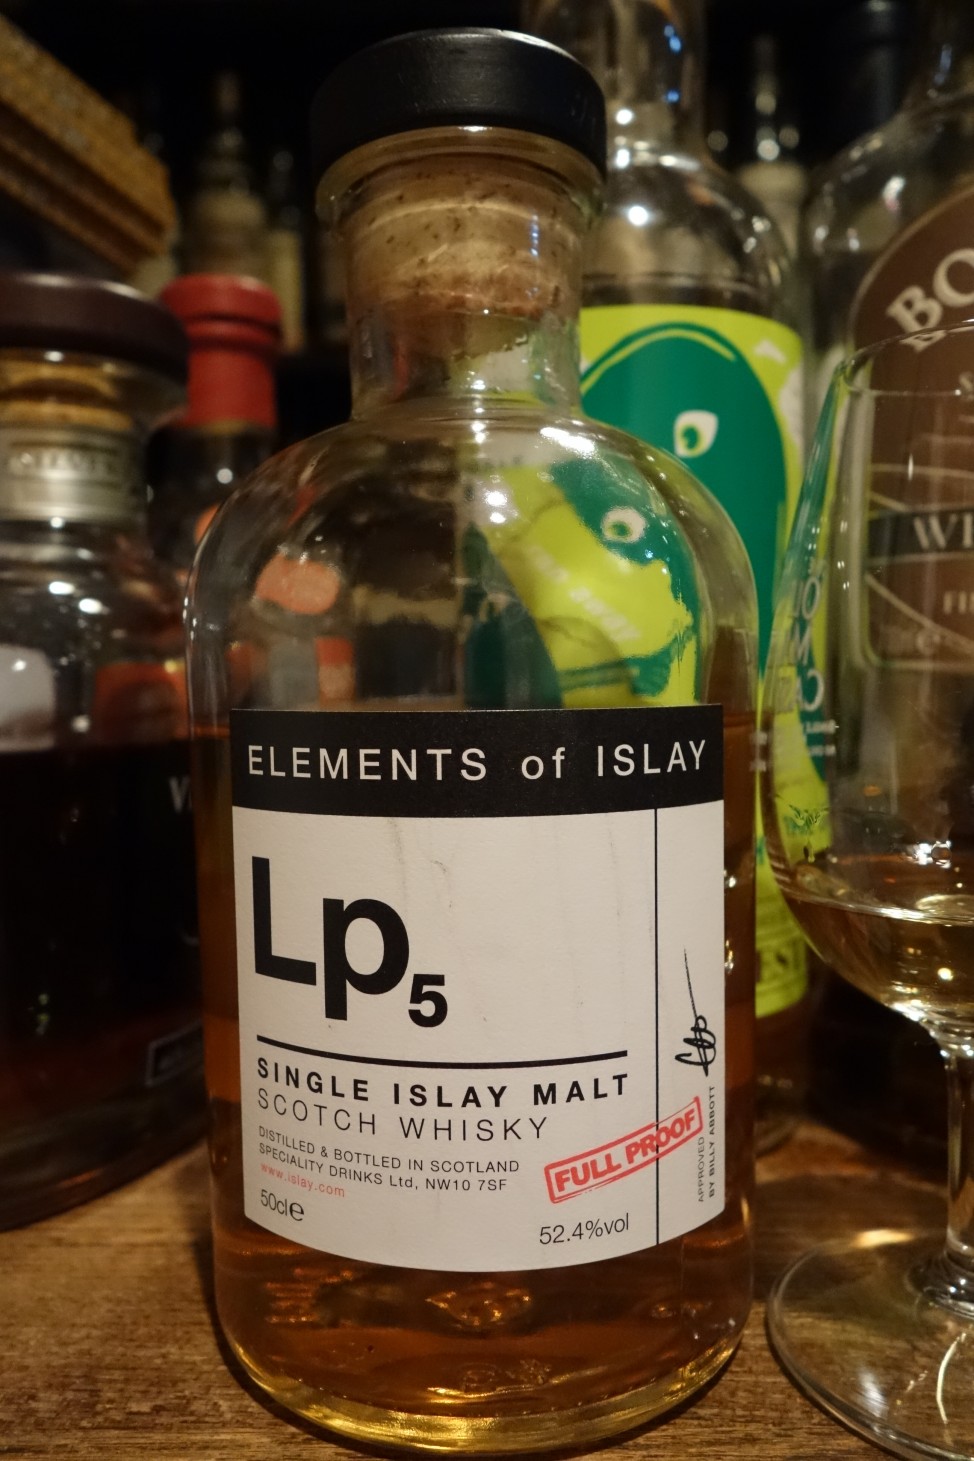 LAPHROAIG Lp5 SPECIALITY DRINKS ELEMENTS OF ISLAY